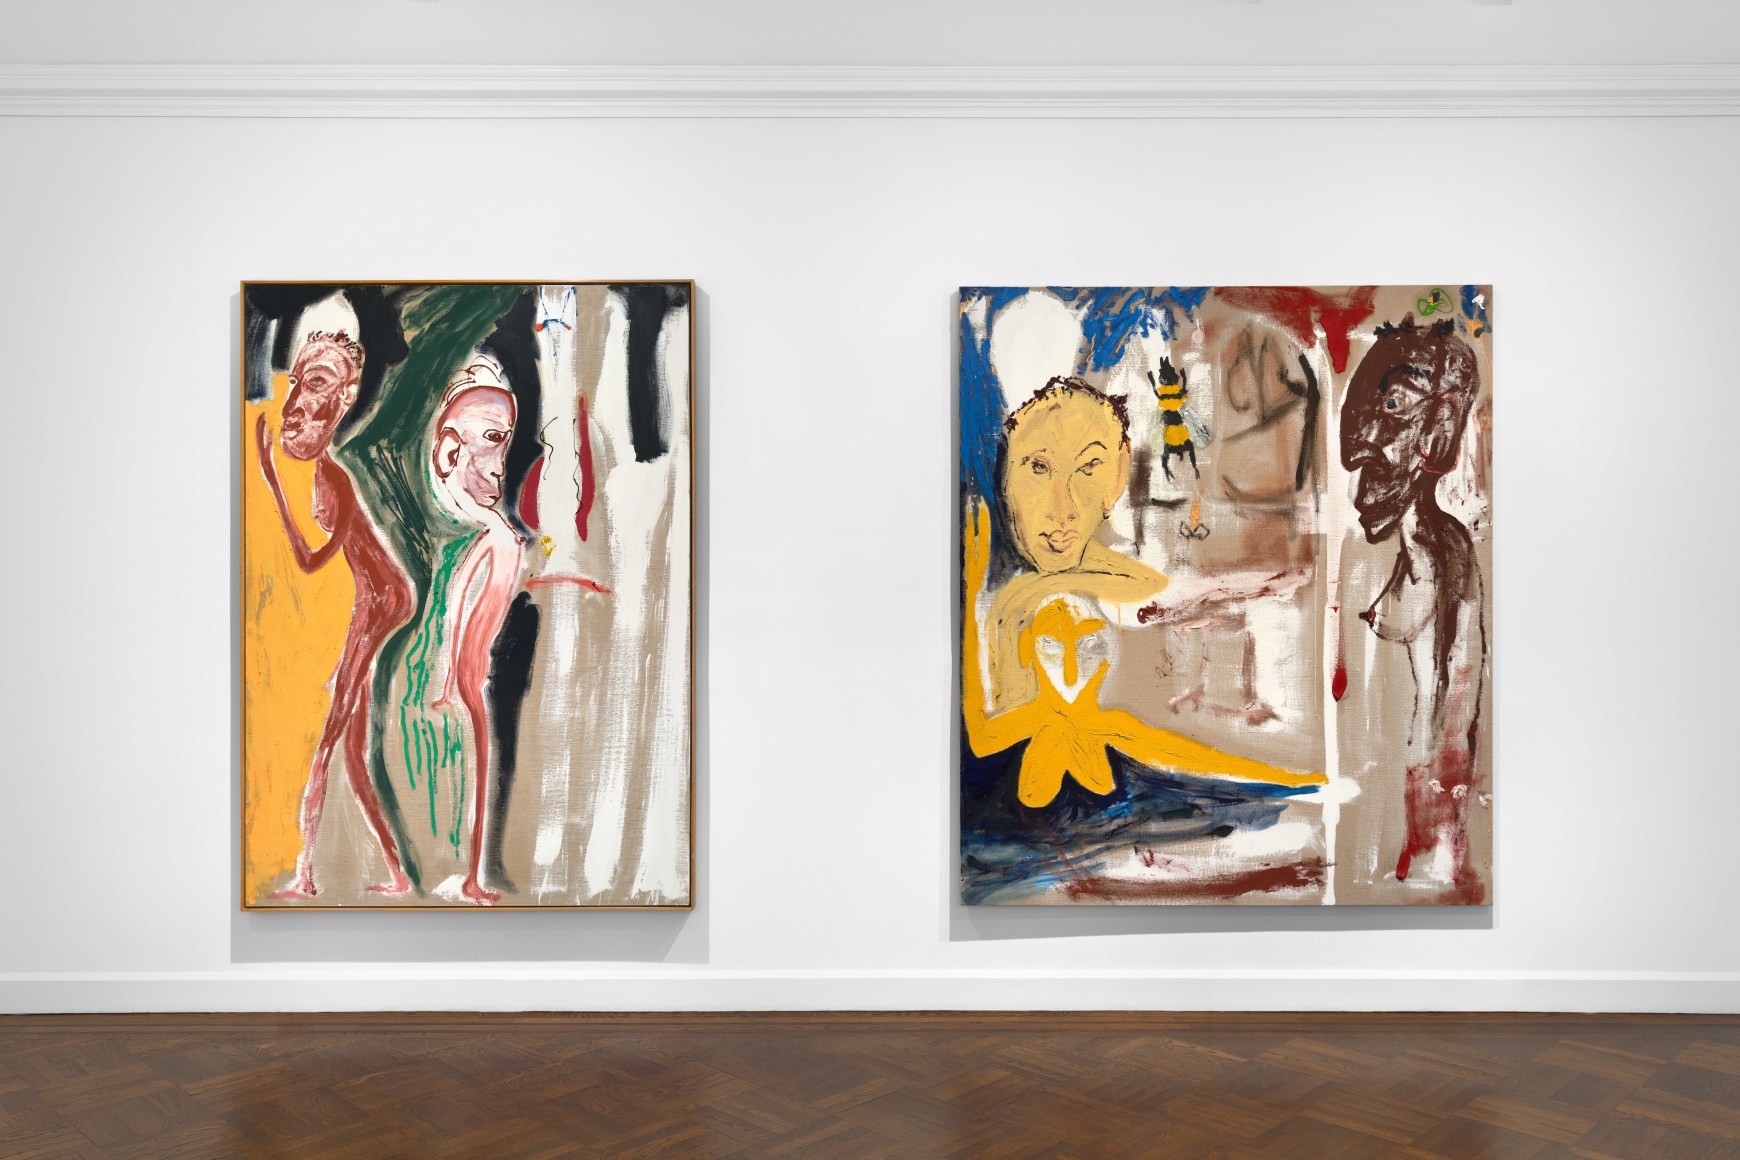 Don Van Vliet, Parapliers the Willow Dipped, Paintings 1967-1997, New York, 2020, Installation Image 15